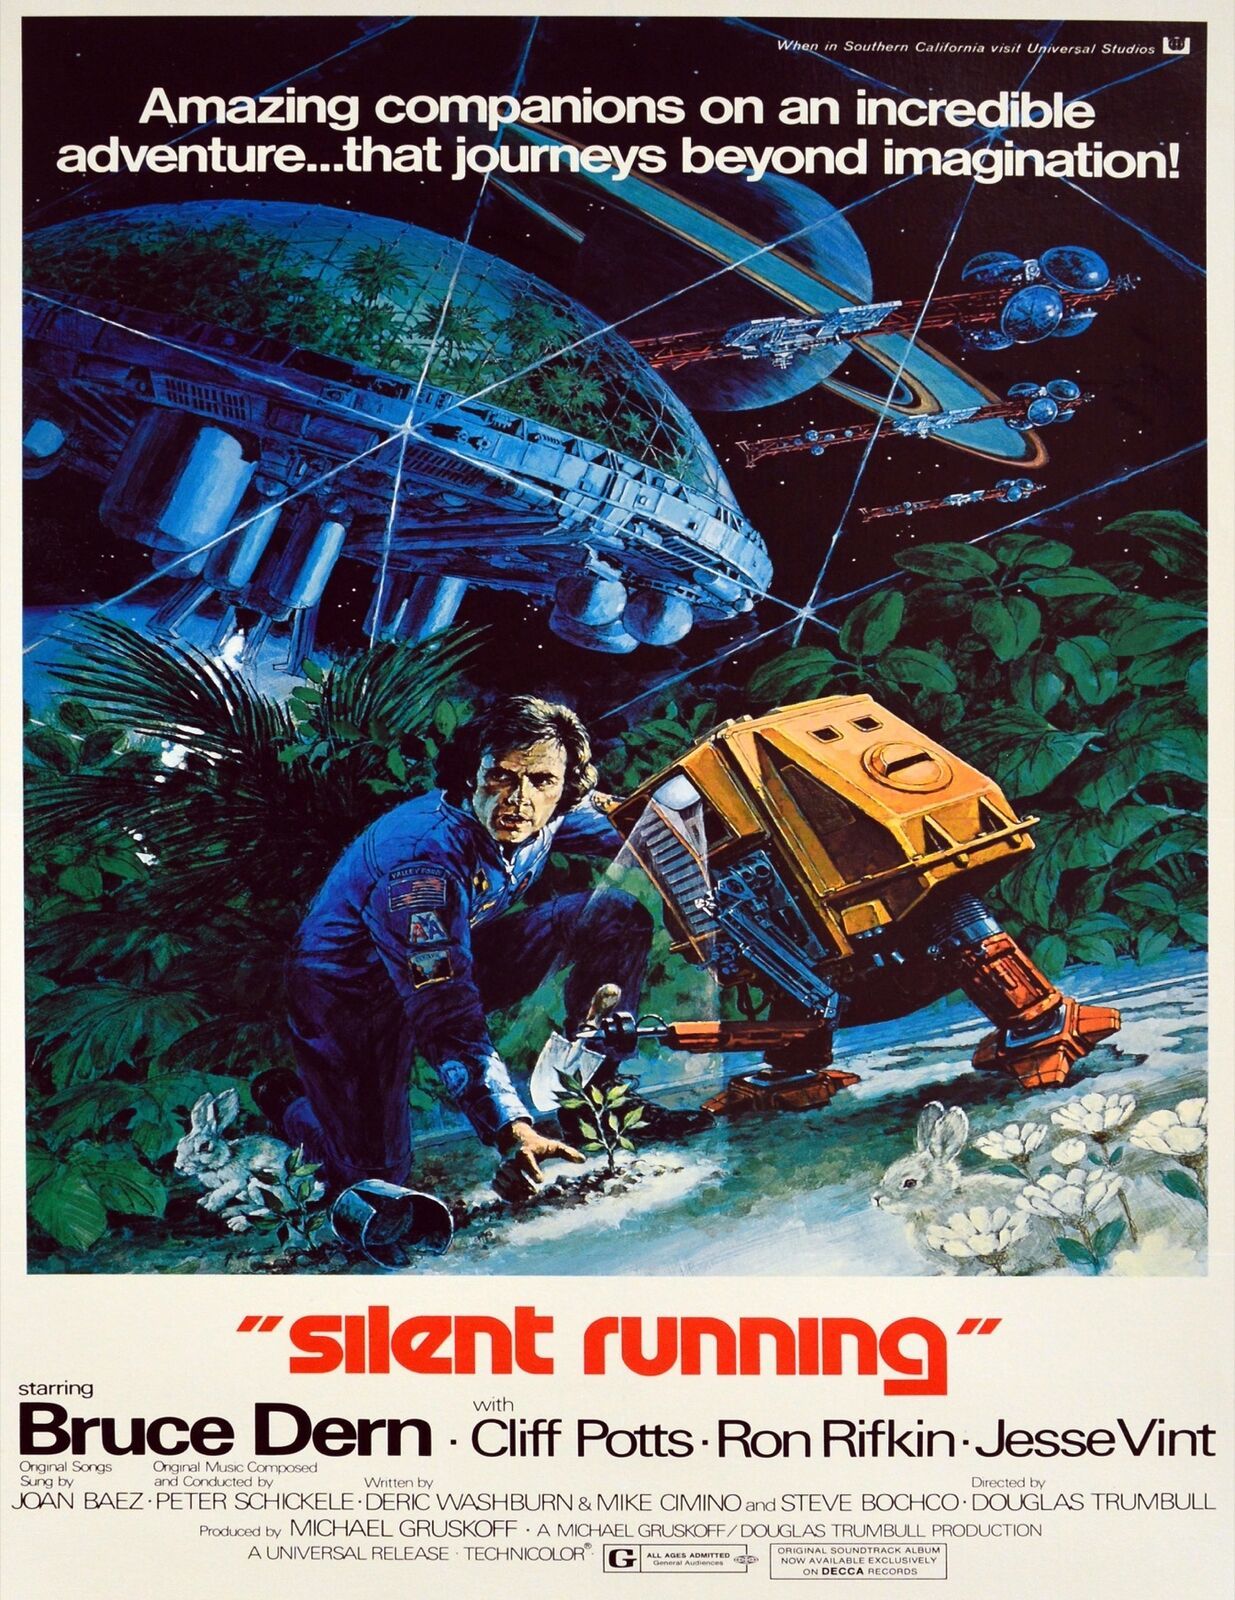 Primary image for 8715.Decoration Poster.Home Room wall art design.Silent Running cult sci-fi film